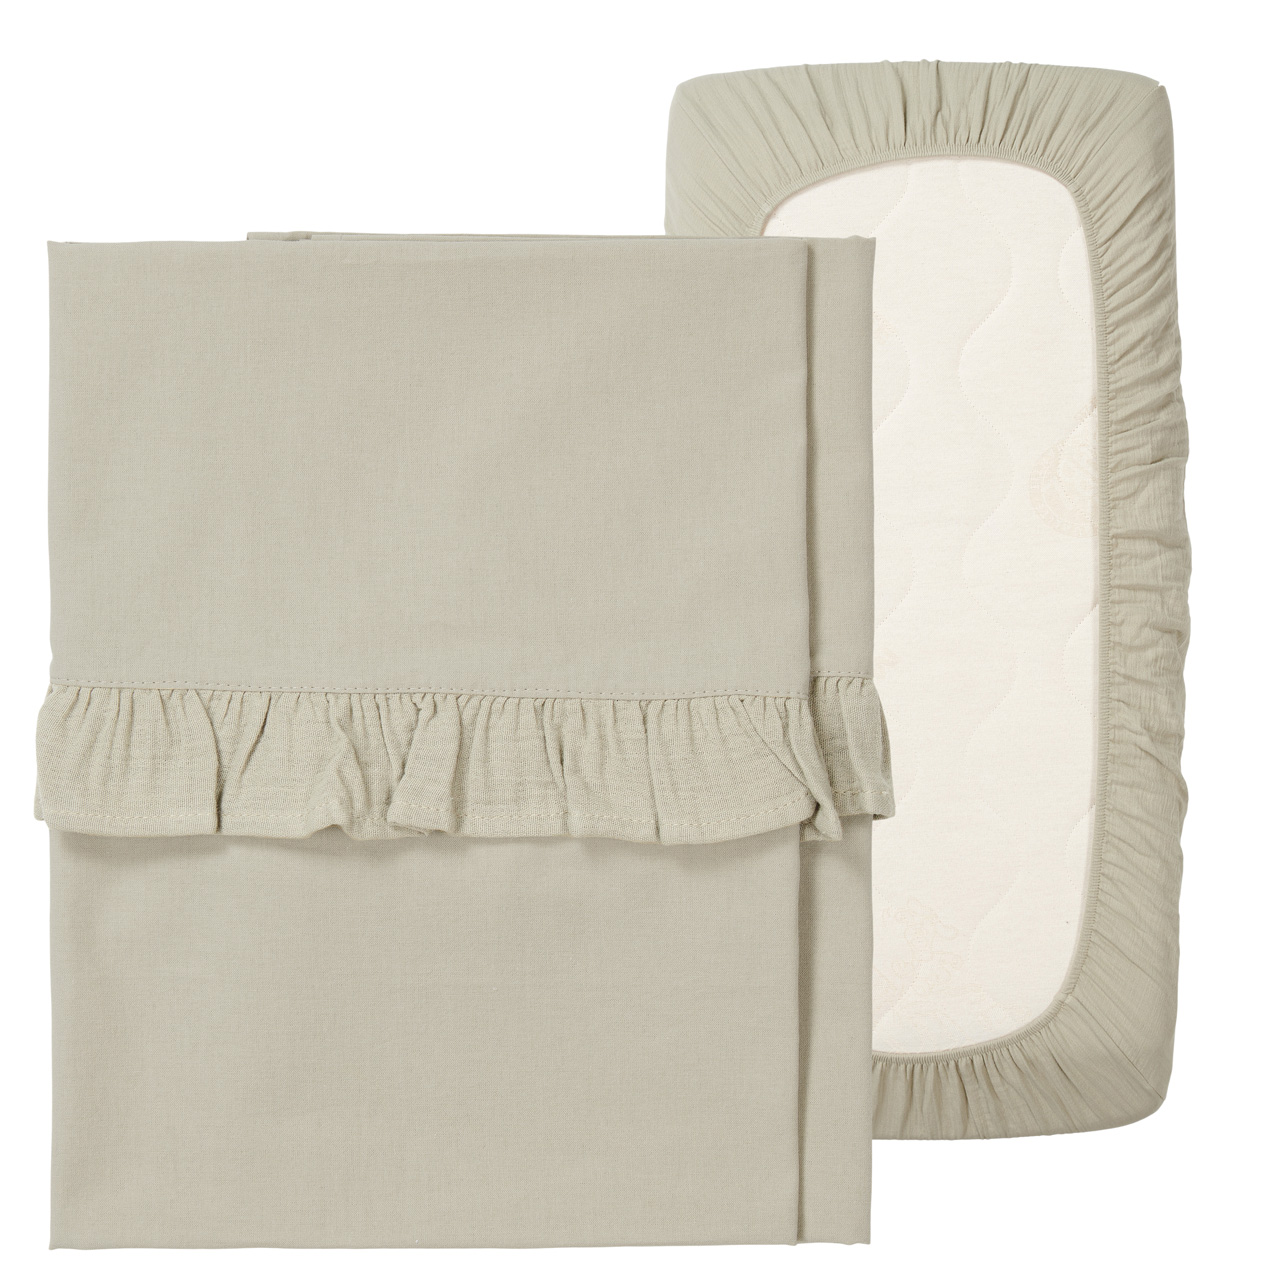 Cot sheet and fitted sheet ruffle combi pack Faro sage